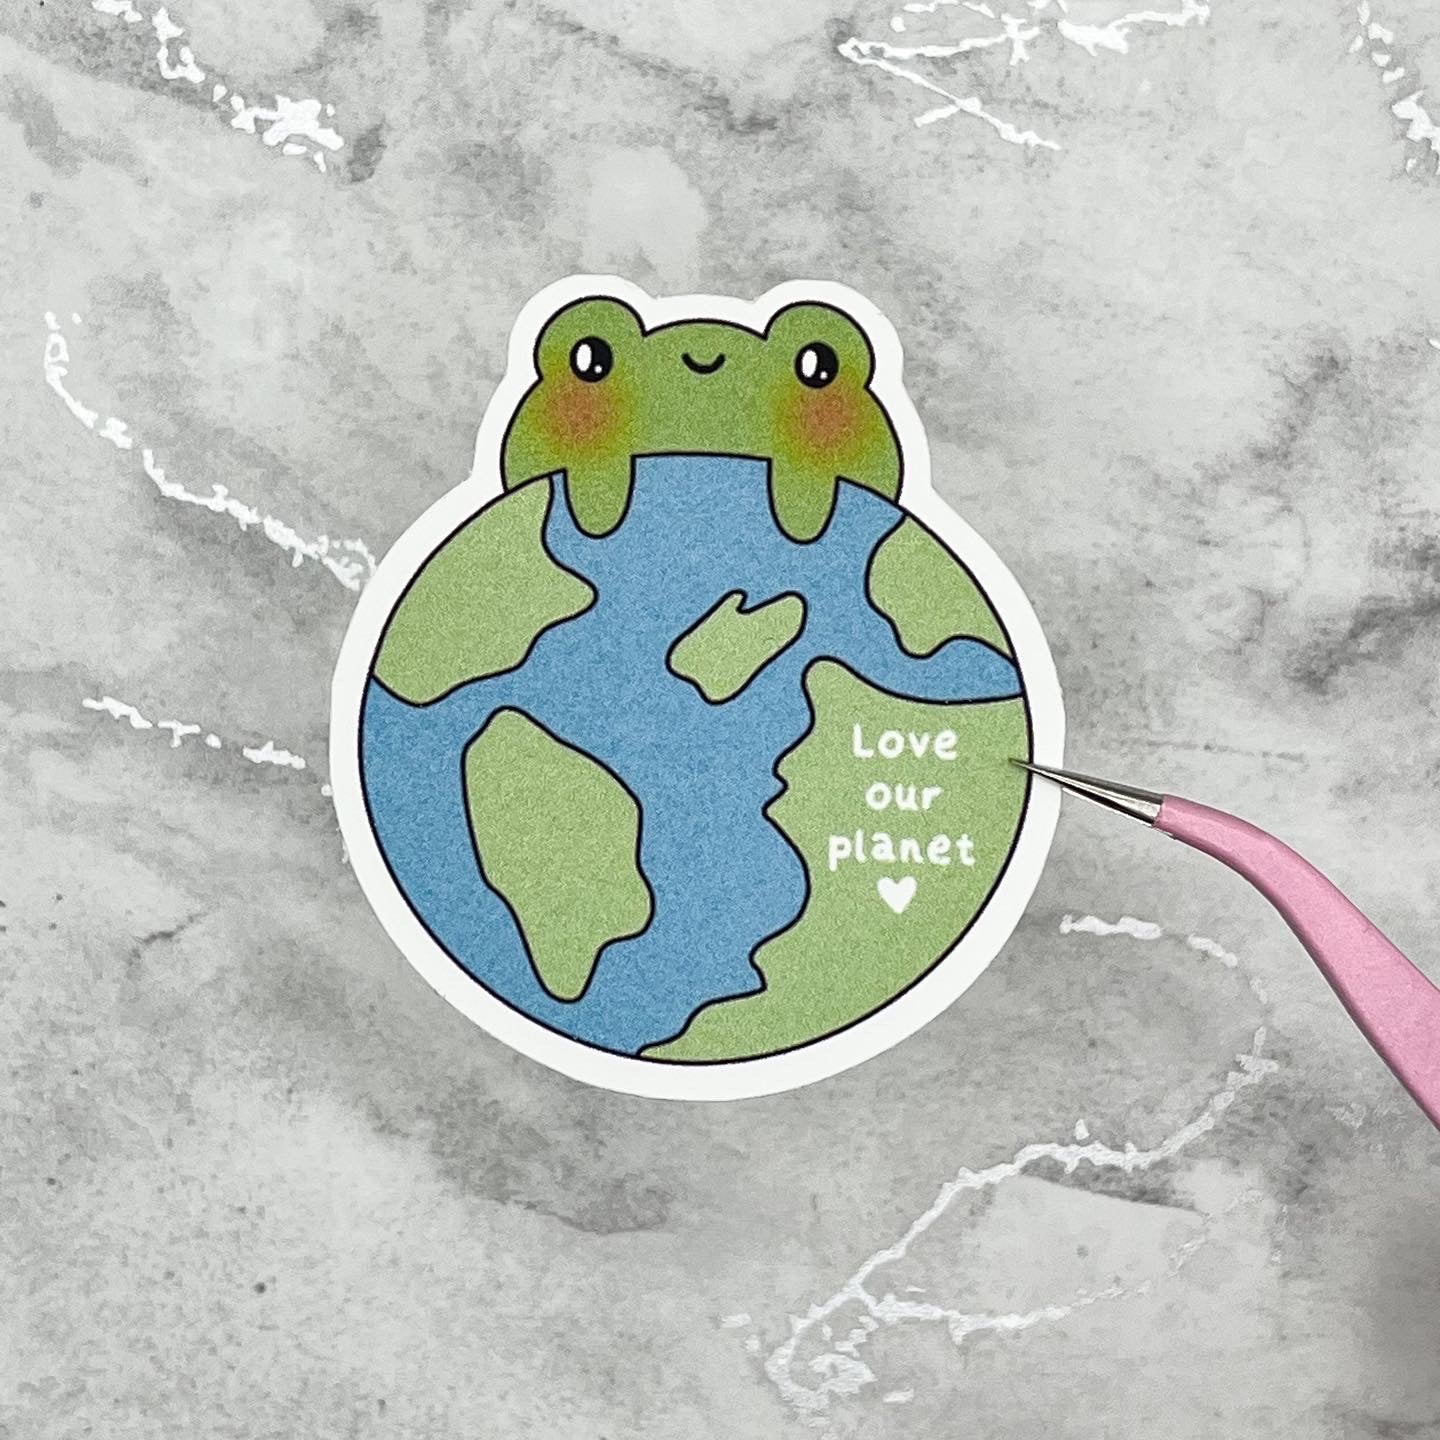 Love our planet sticker